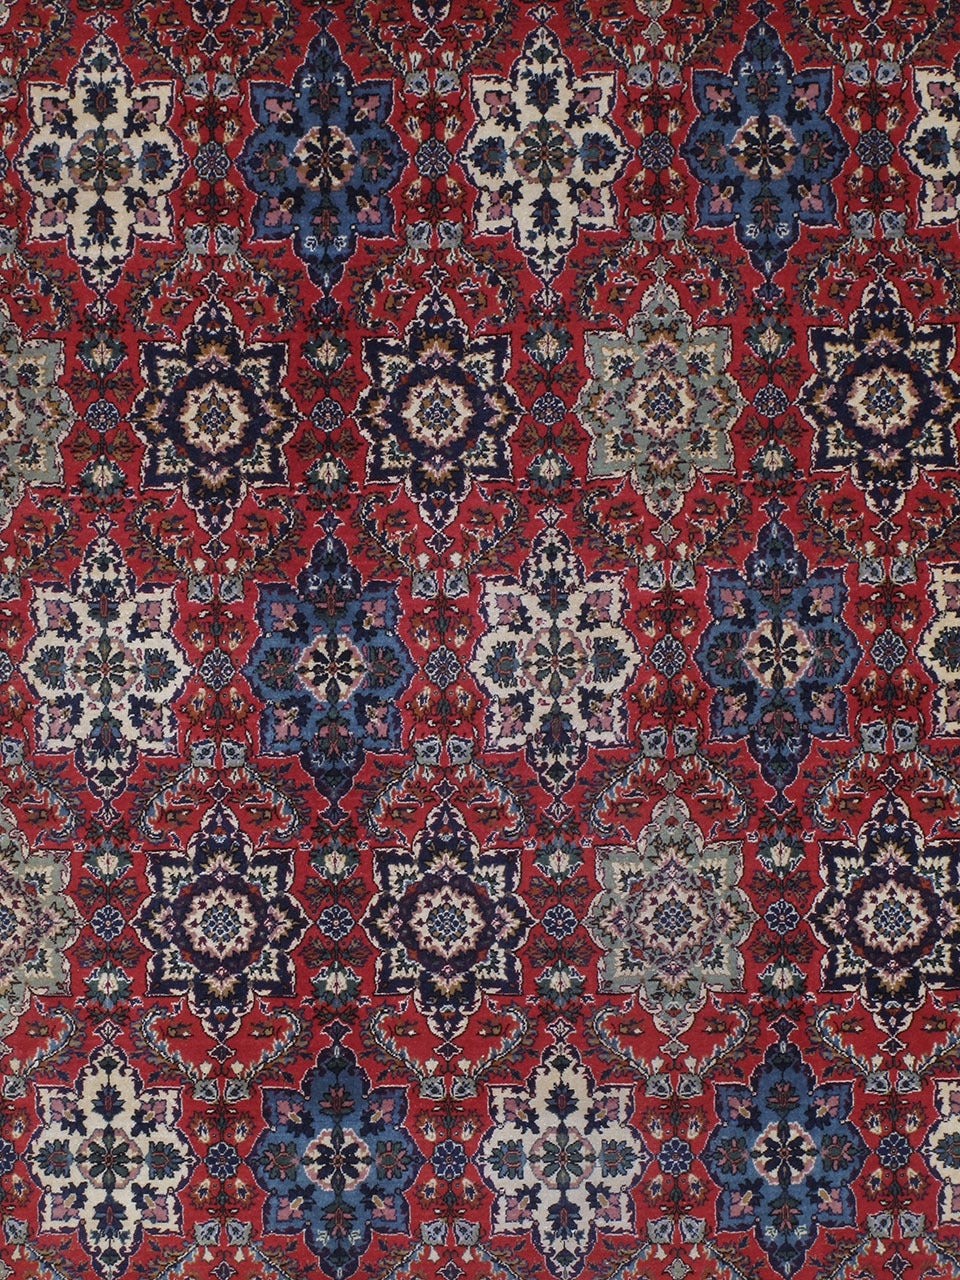 A classical beauty from a prolific weaving region in Eastern Turkey. A rare find, especially considering its excellent state of preservation.